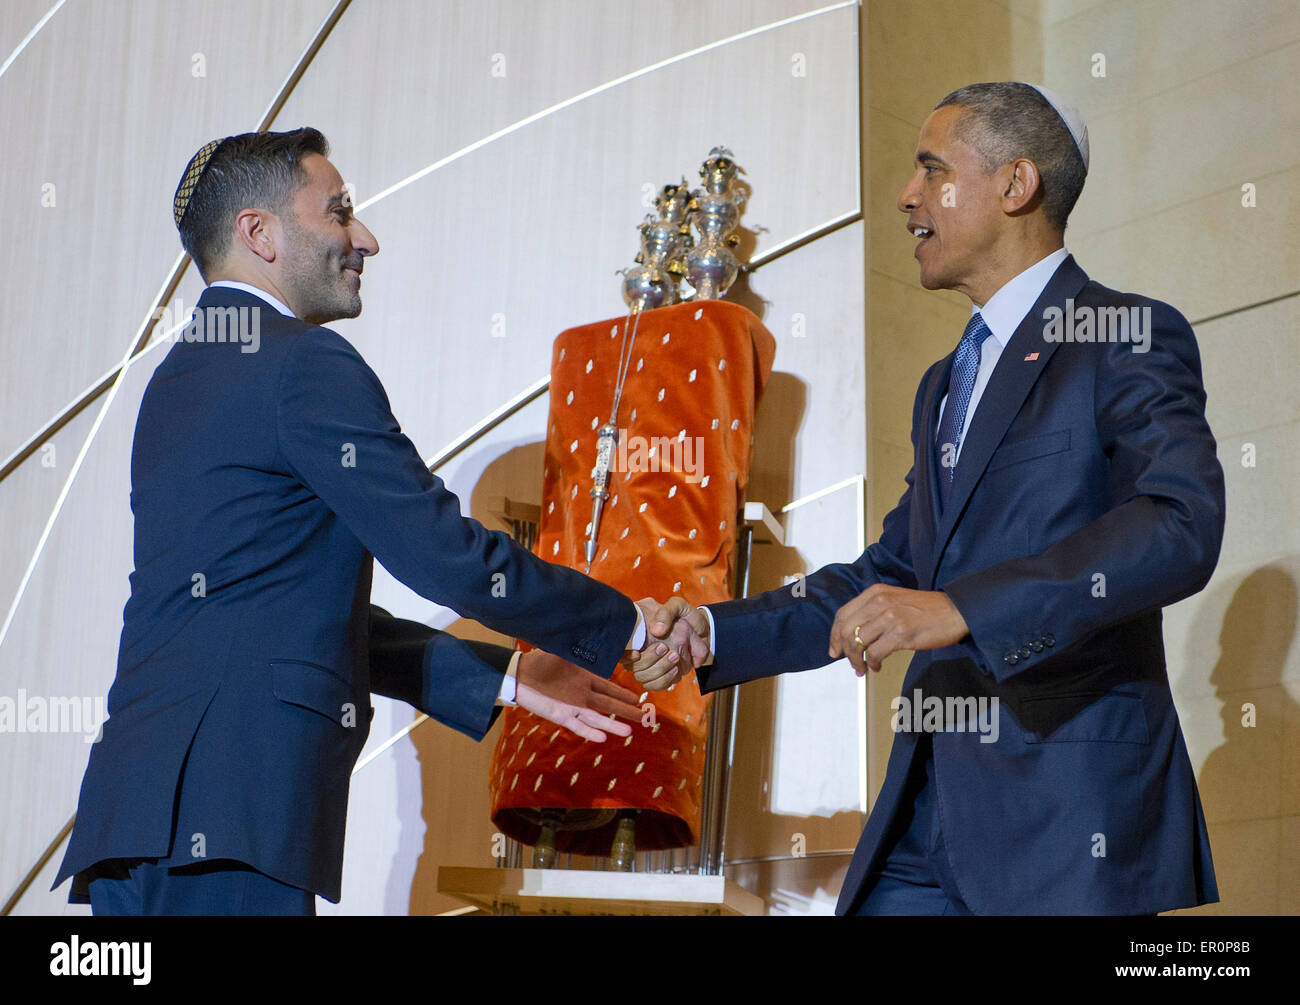 Senior Rabbi Gil Steinlauf, left, welcomes United States President Barack Obama to Adas Israel Congregation in Washington, DC on Friday, May 22, 2015. The President visited the synagogue to deliver remarks celebrating Jewish American Heritage Month. The visit coincides with Solidarity Shabbat, a world-wide effort by high ranking government officials from around the world visit synagogues in their countries to highlight their commitment to combating anti-Semitism. Credit: Ron Sachs/CNP - NO WIRE SERVICE - Stock Photo